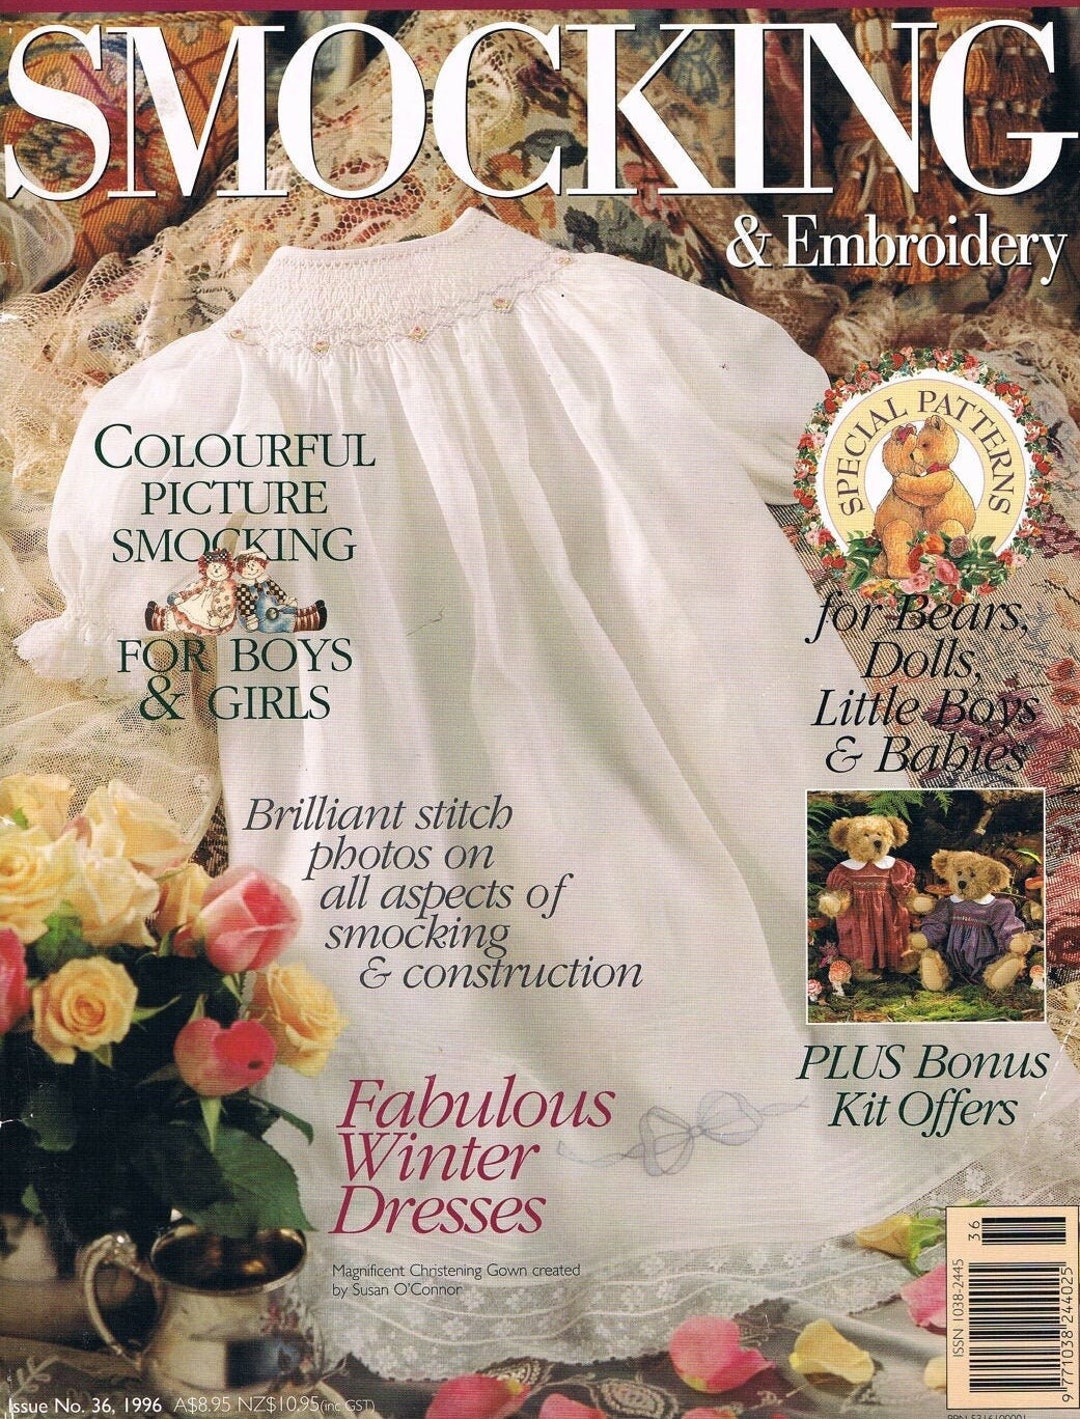 Issue 36 Australian Smocking and Embroidery - Etsy